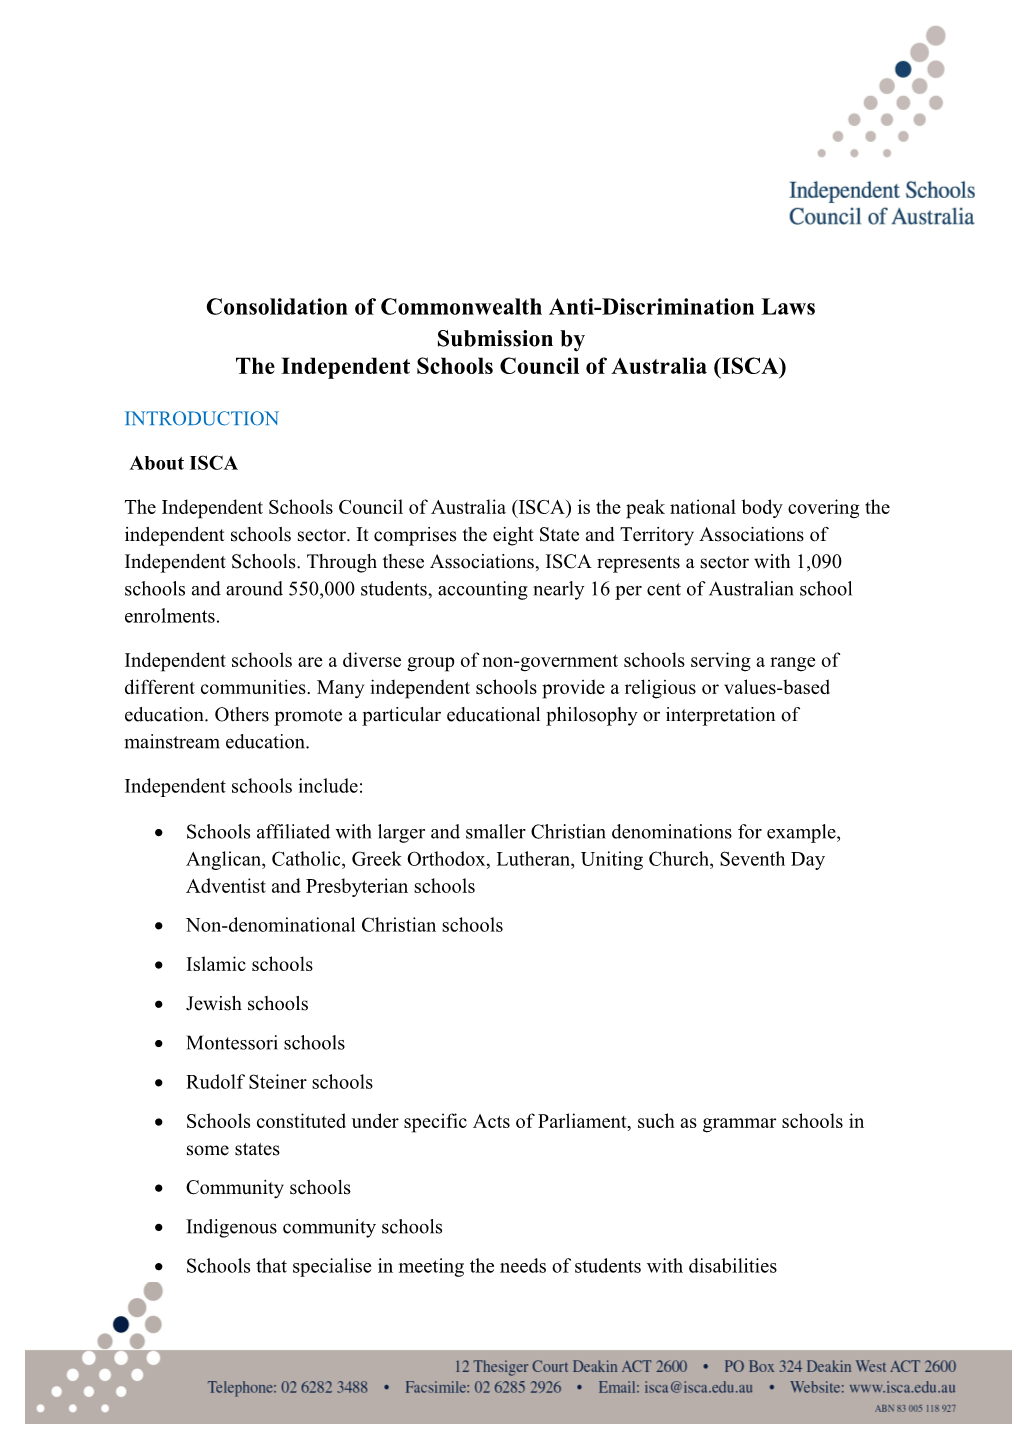 Submission on the Consolidation of Commonwealth Anti-Discrimination Laws - Independent